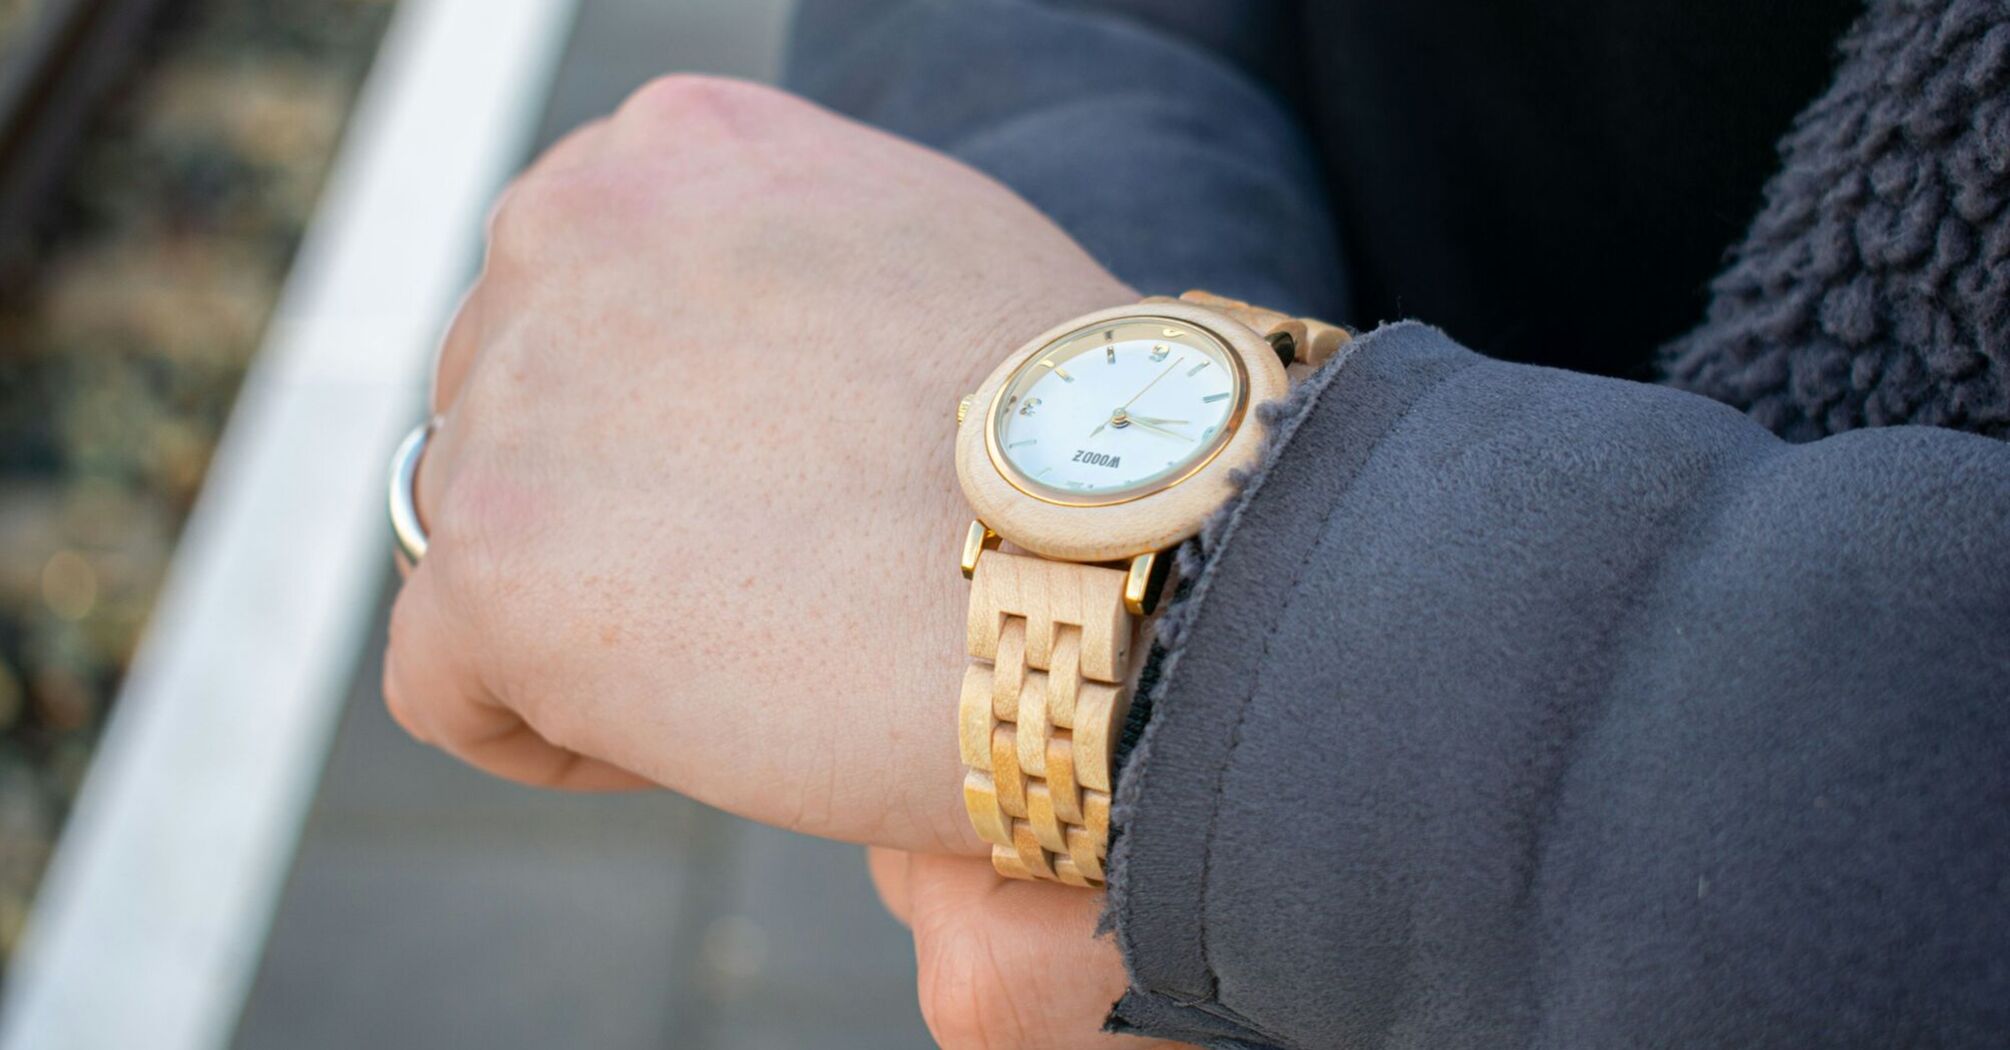 A close-up of a person checking the time on a wooden wristwatch while standing on a train platform